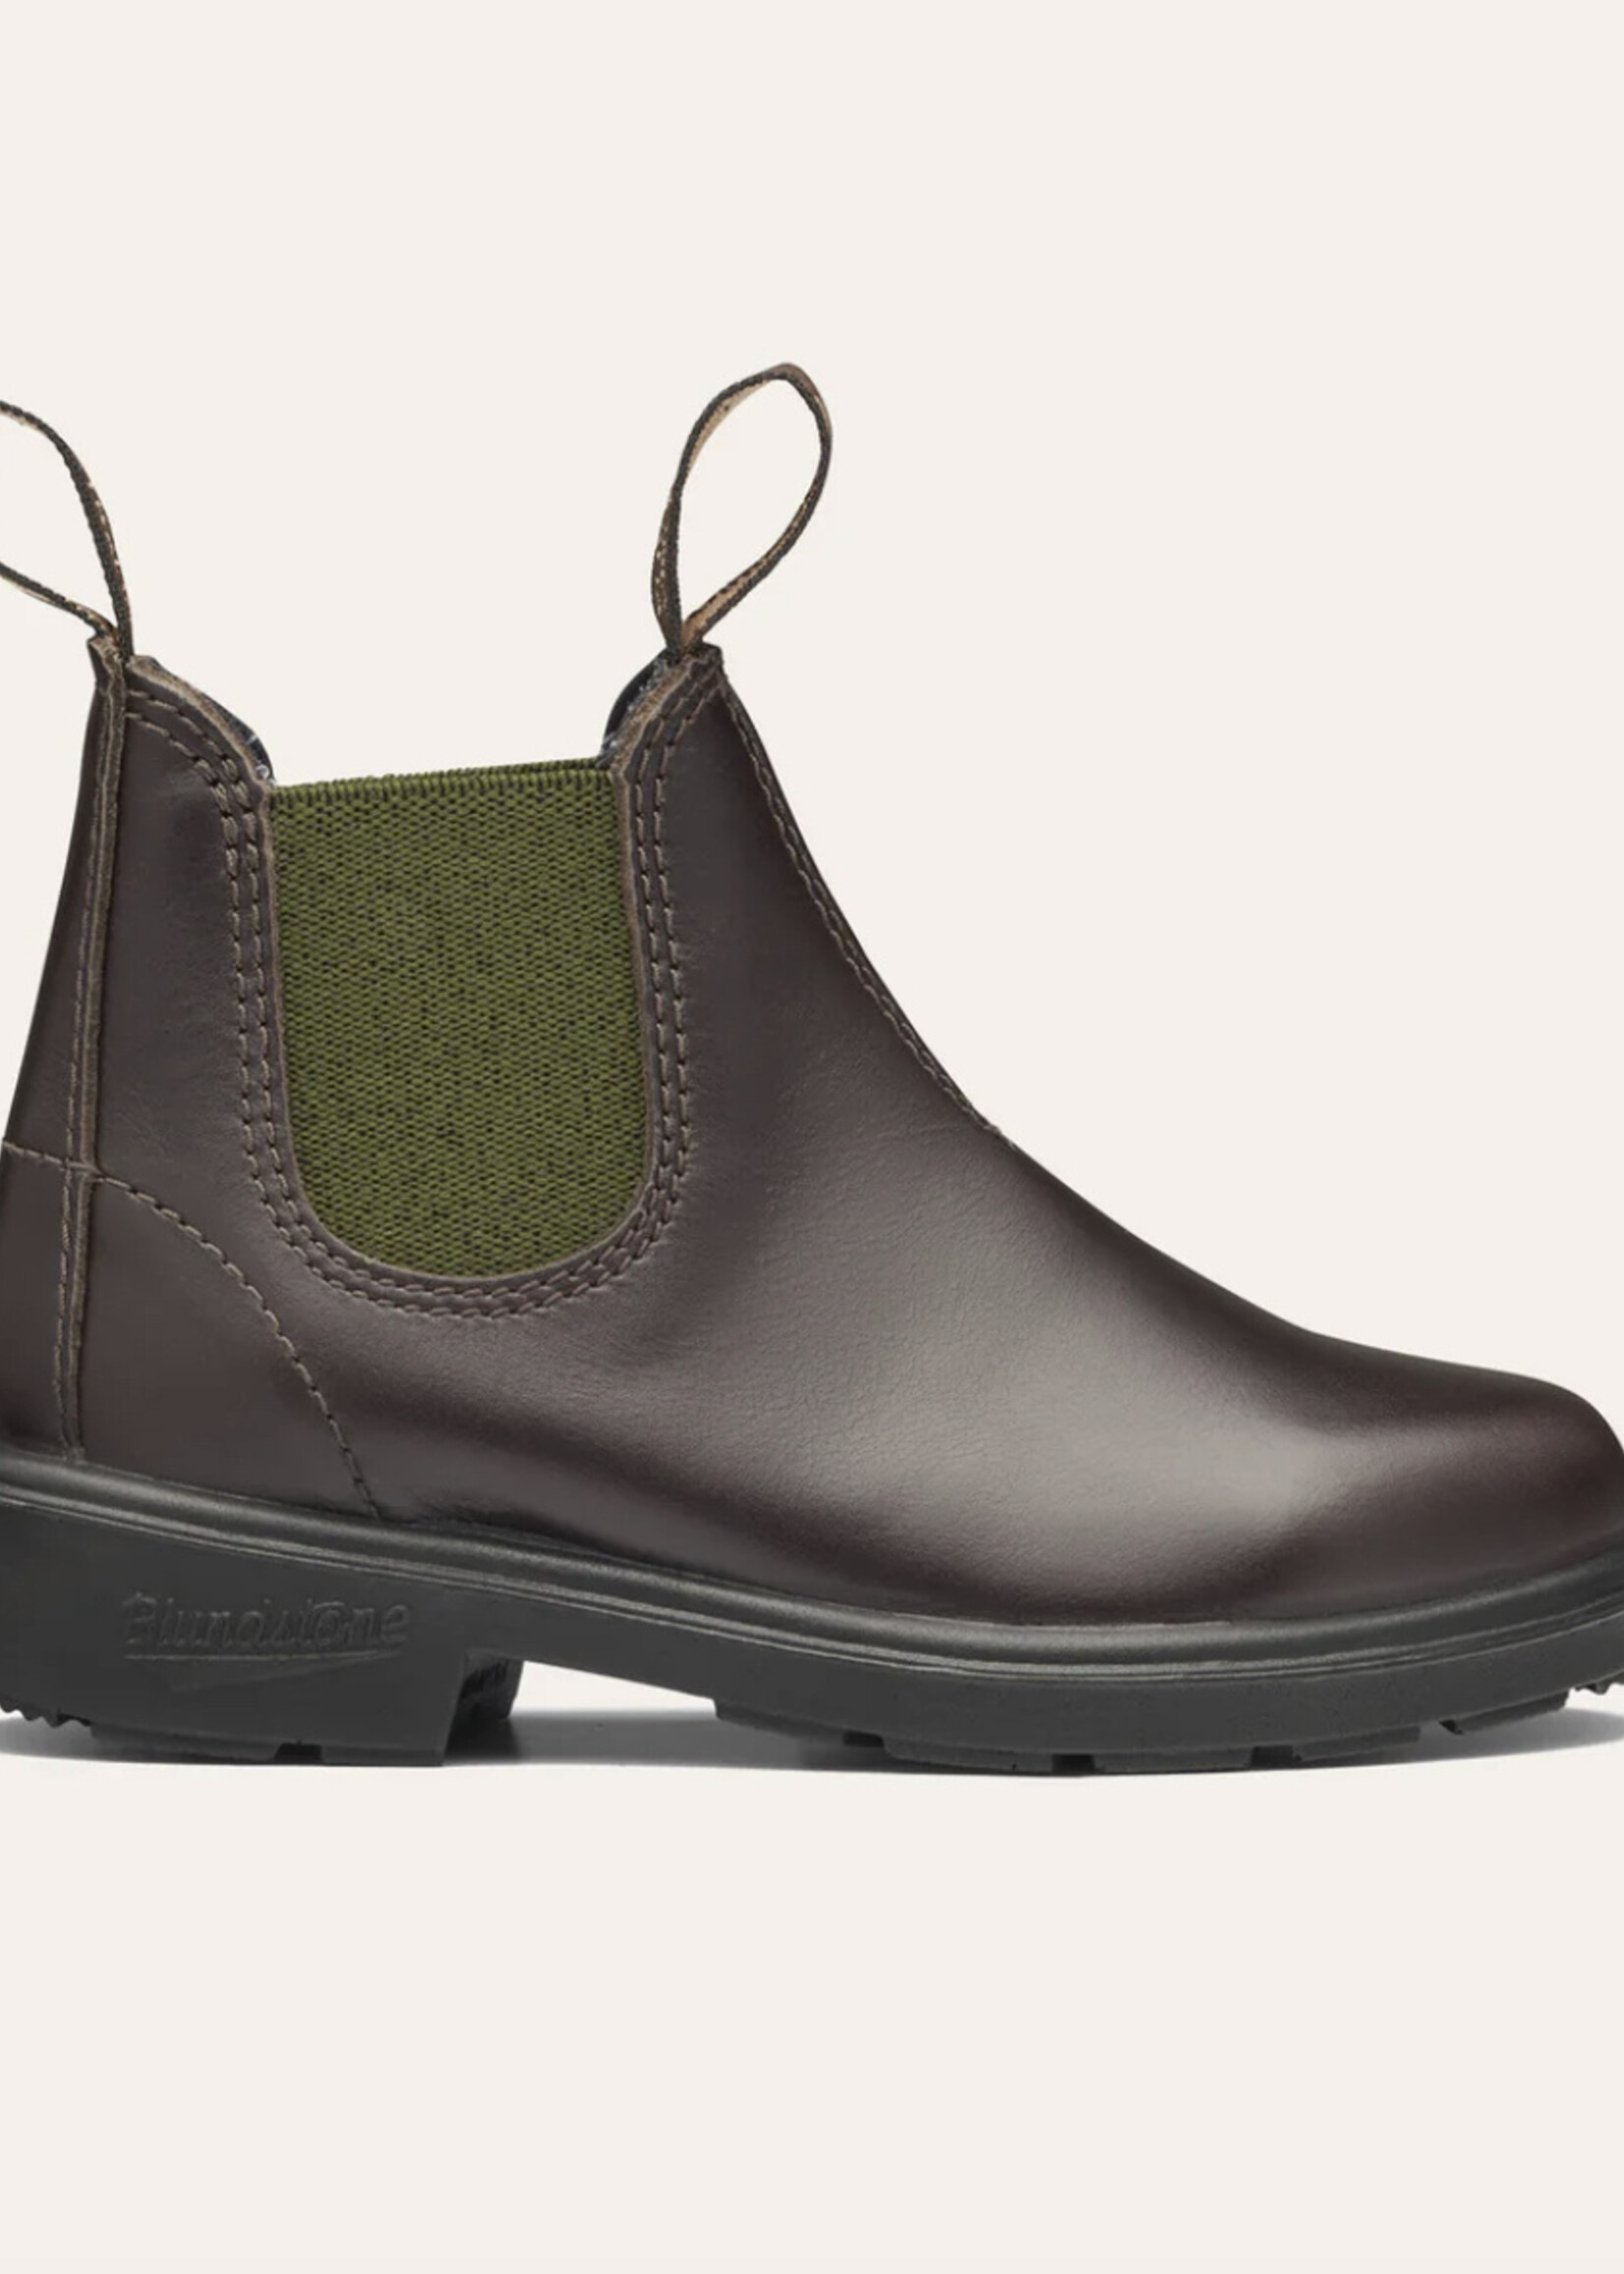 Blundstone 2394 stout brown olive elastic